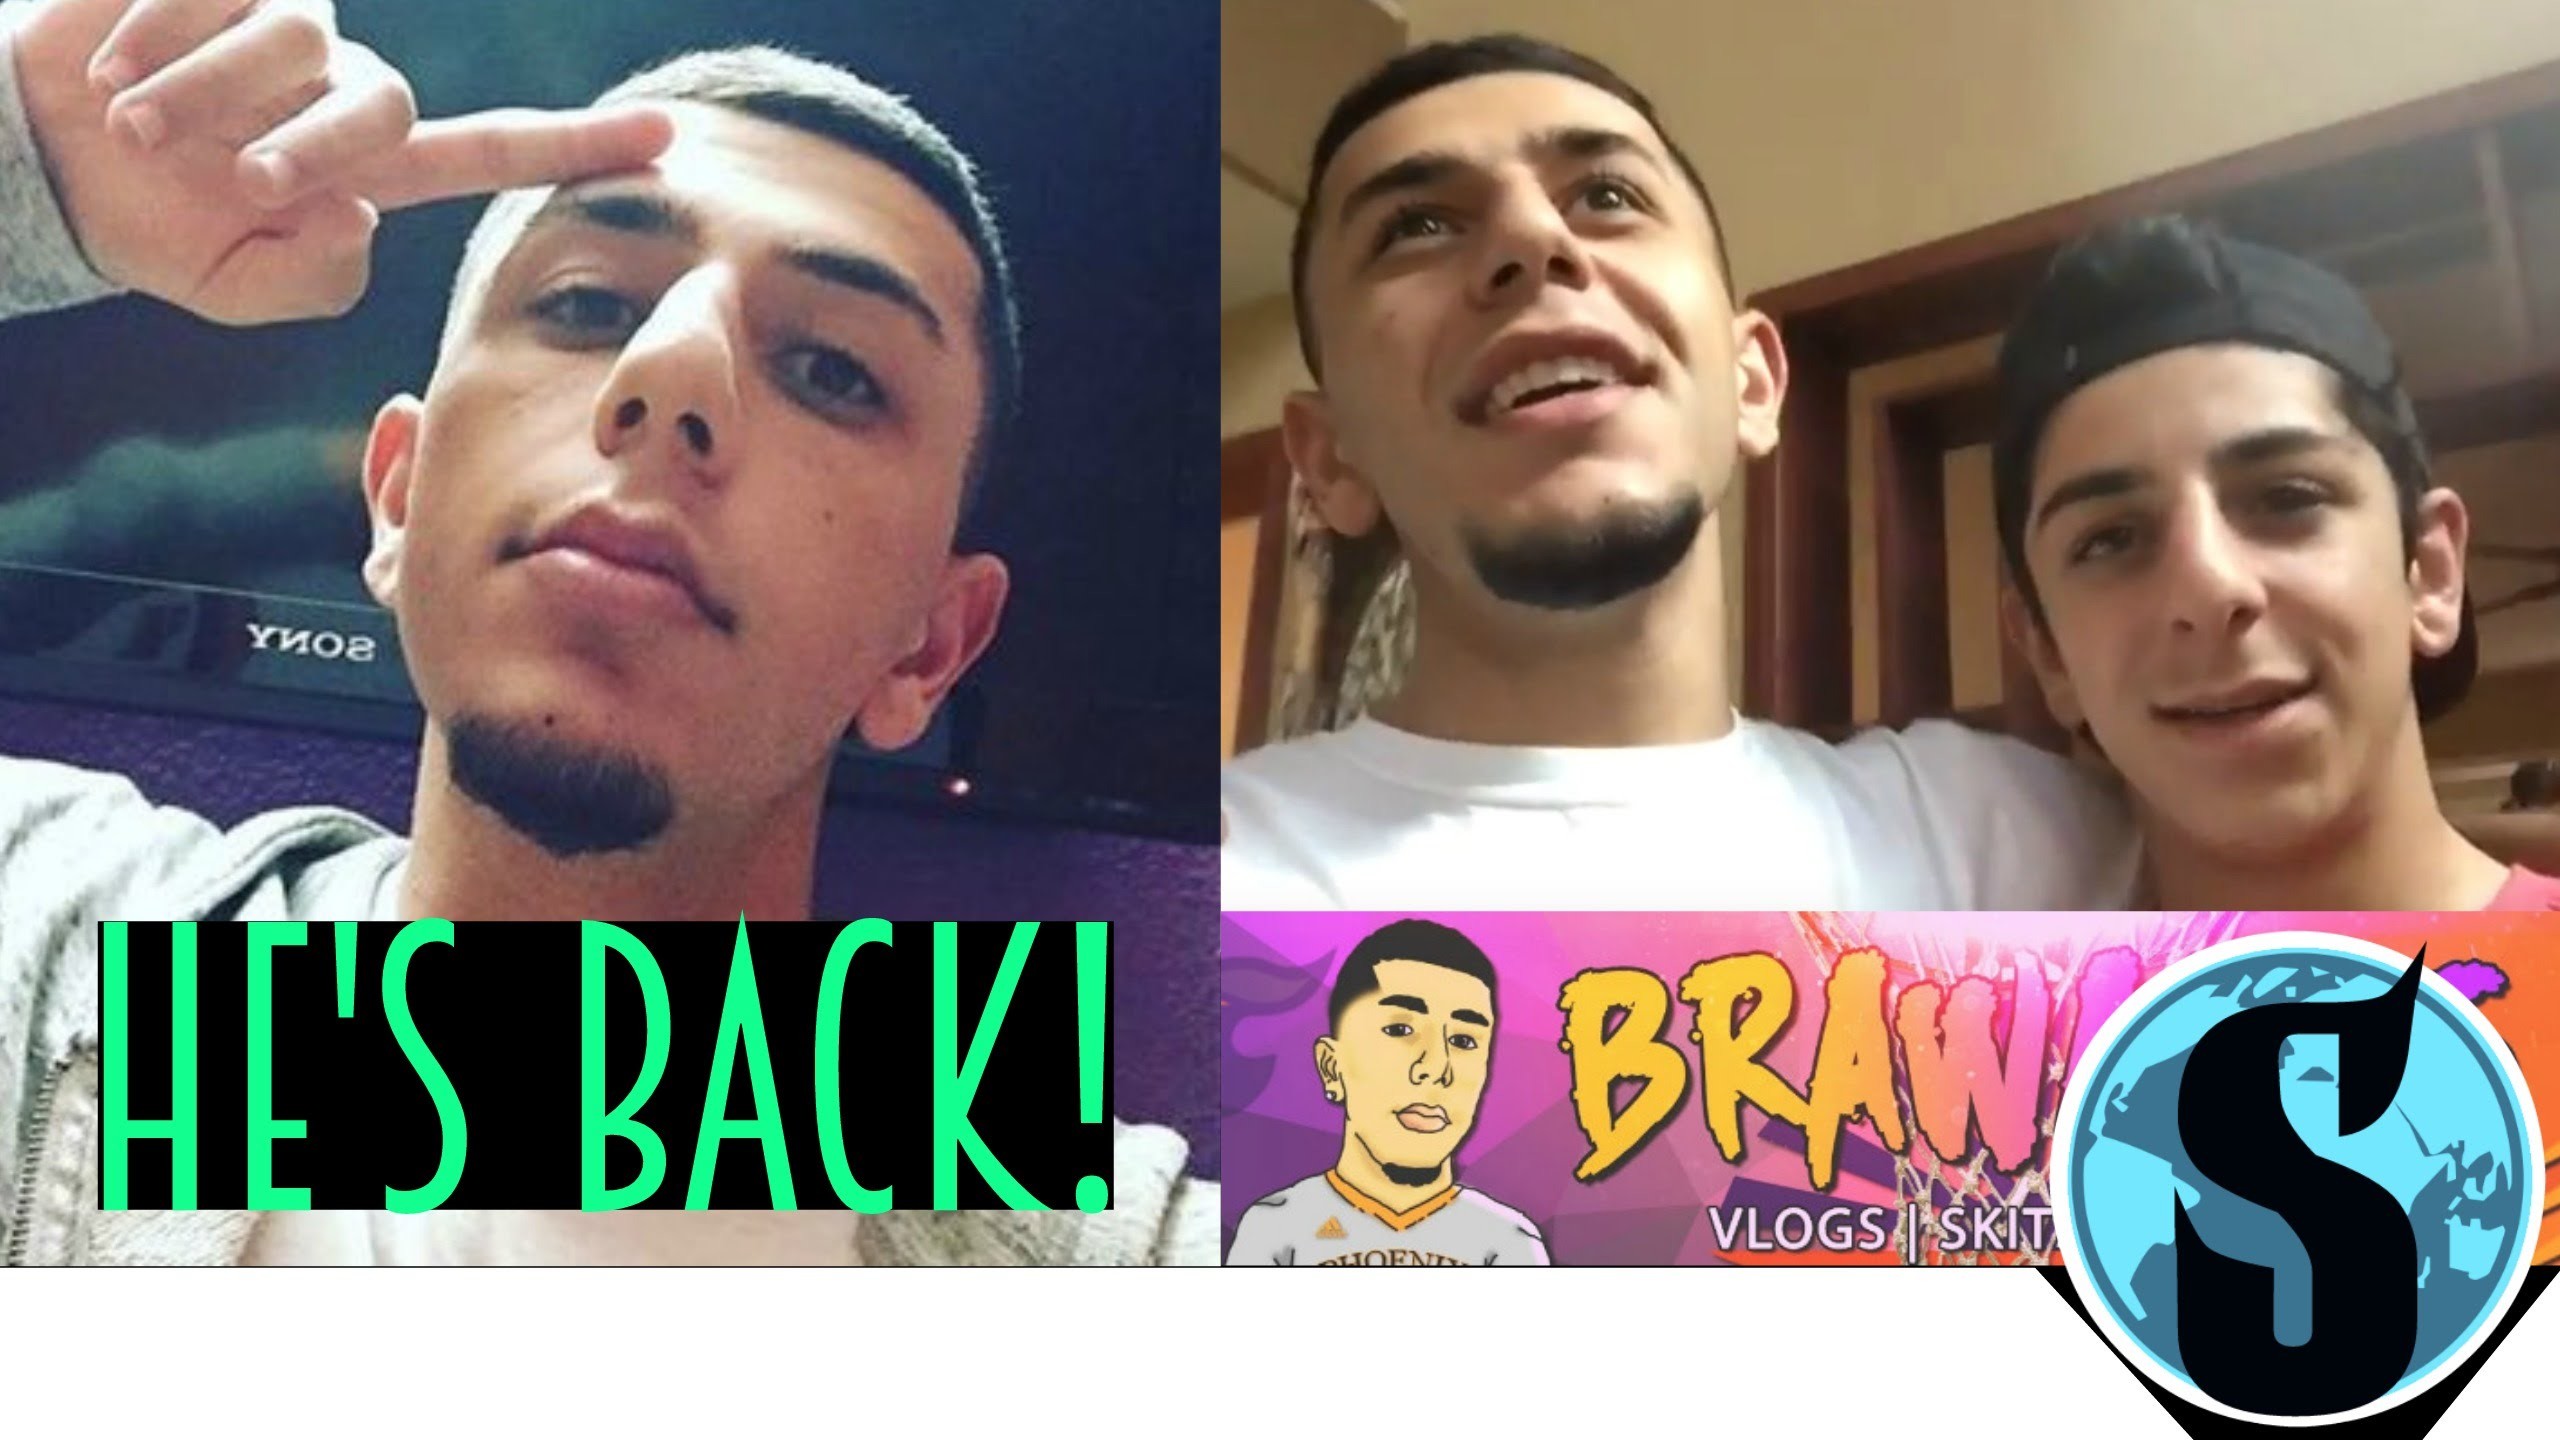 Brawadis Gets His YouTube Twitter Back Uploads New Video With FaZe Rug